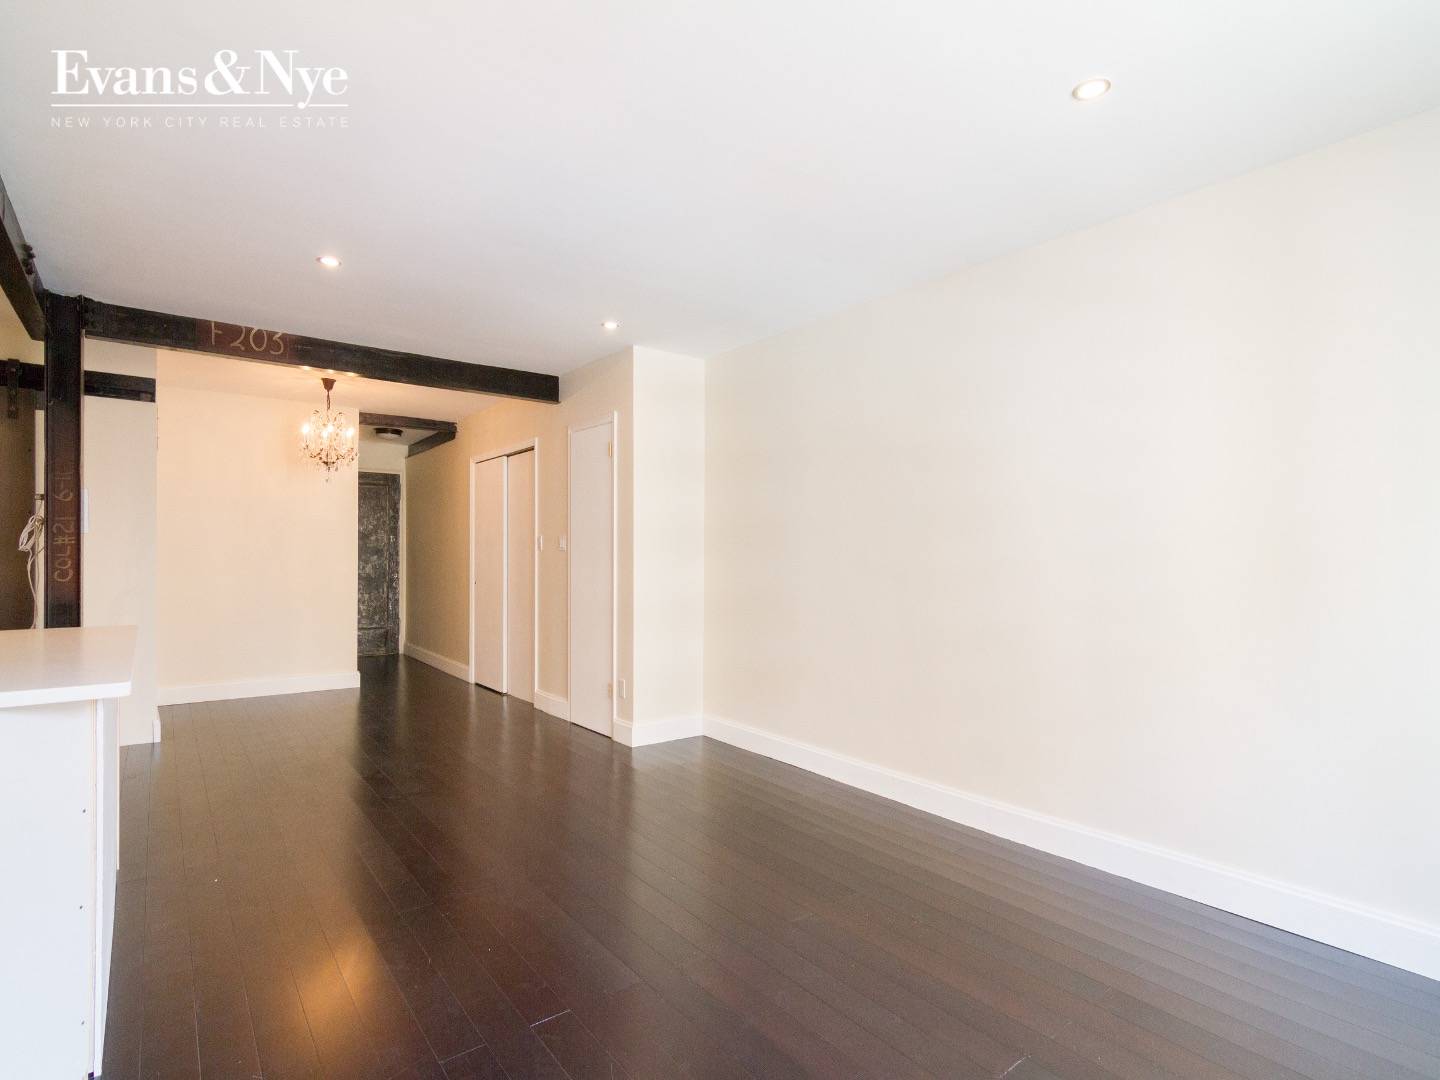 Located at number 50 East 8th Street, Apartment 5X is a two bedroom and one bathroom apartment with plenty of closet and storage space.